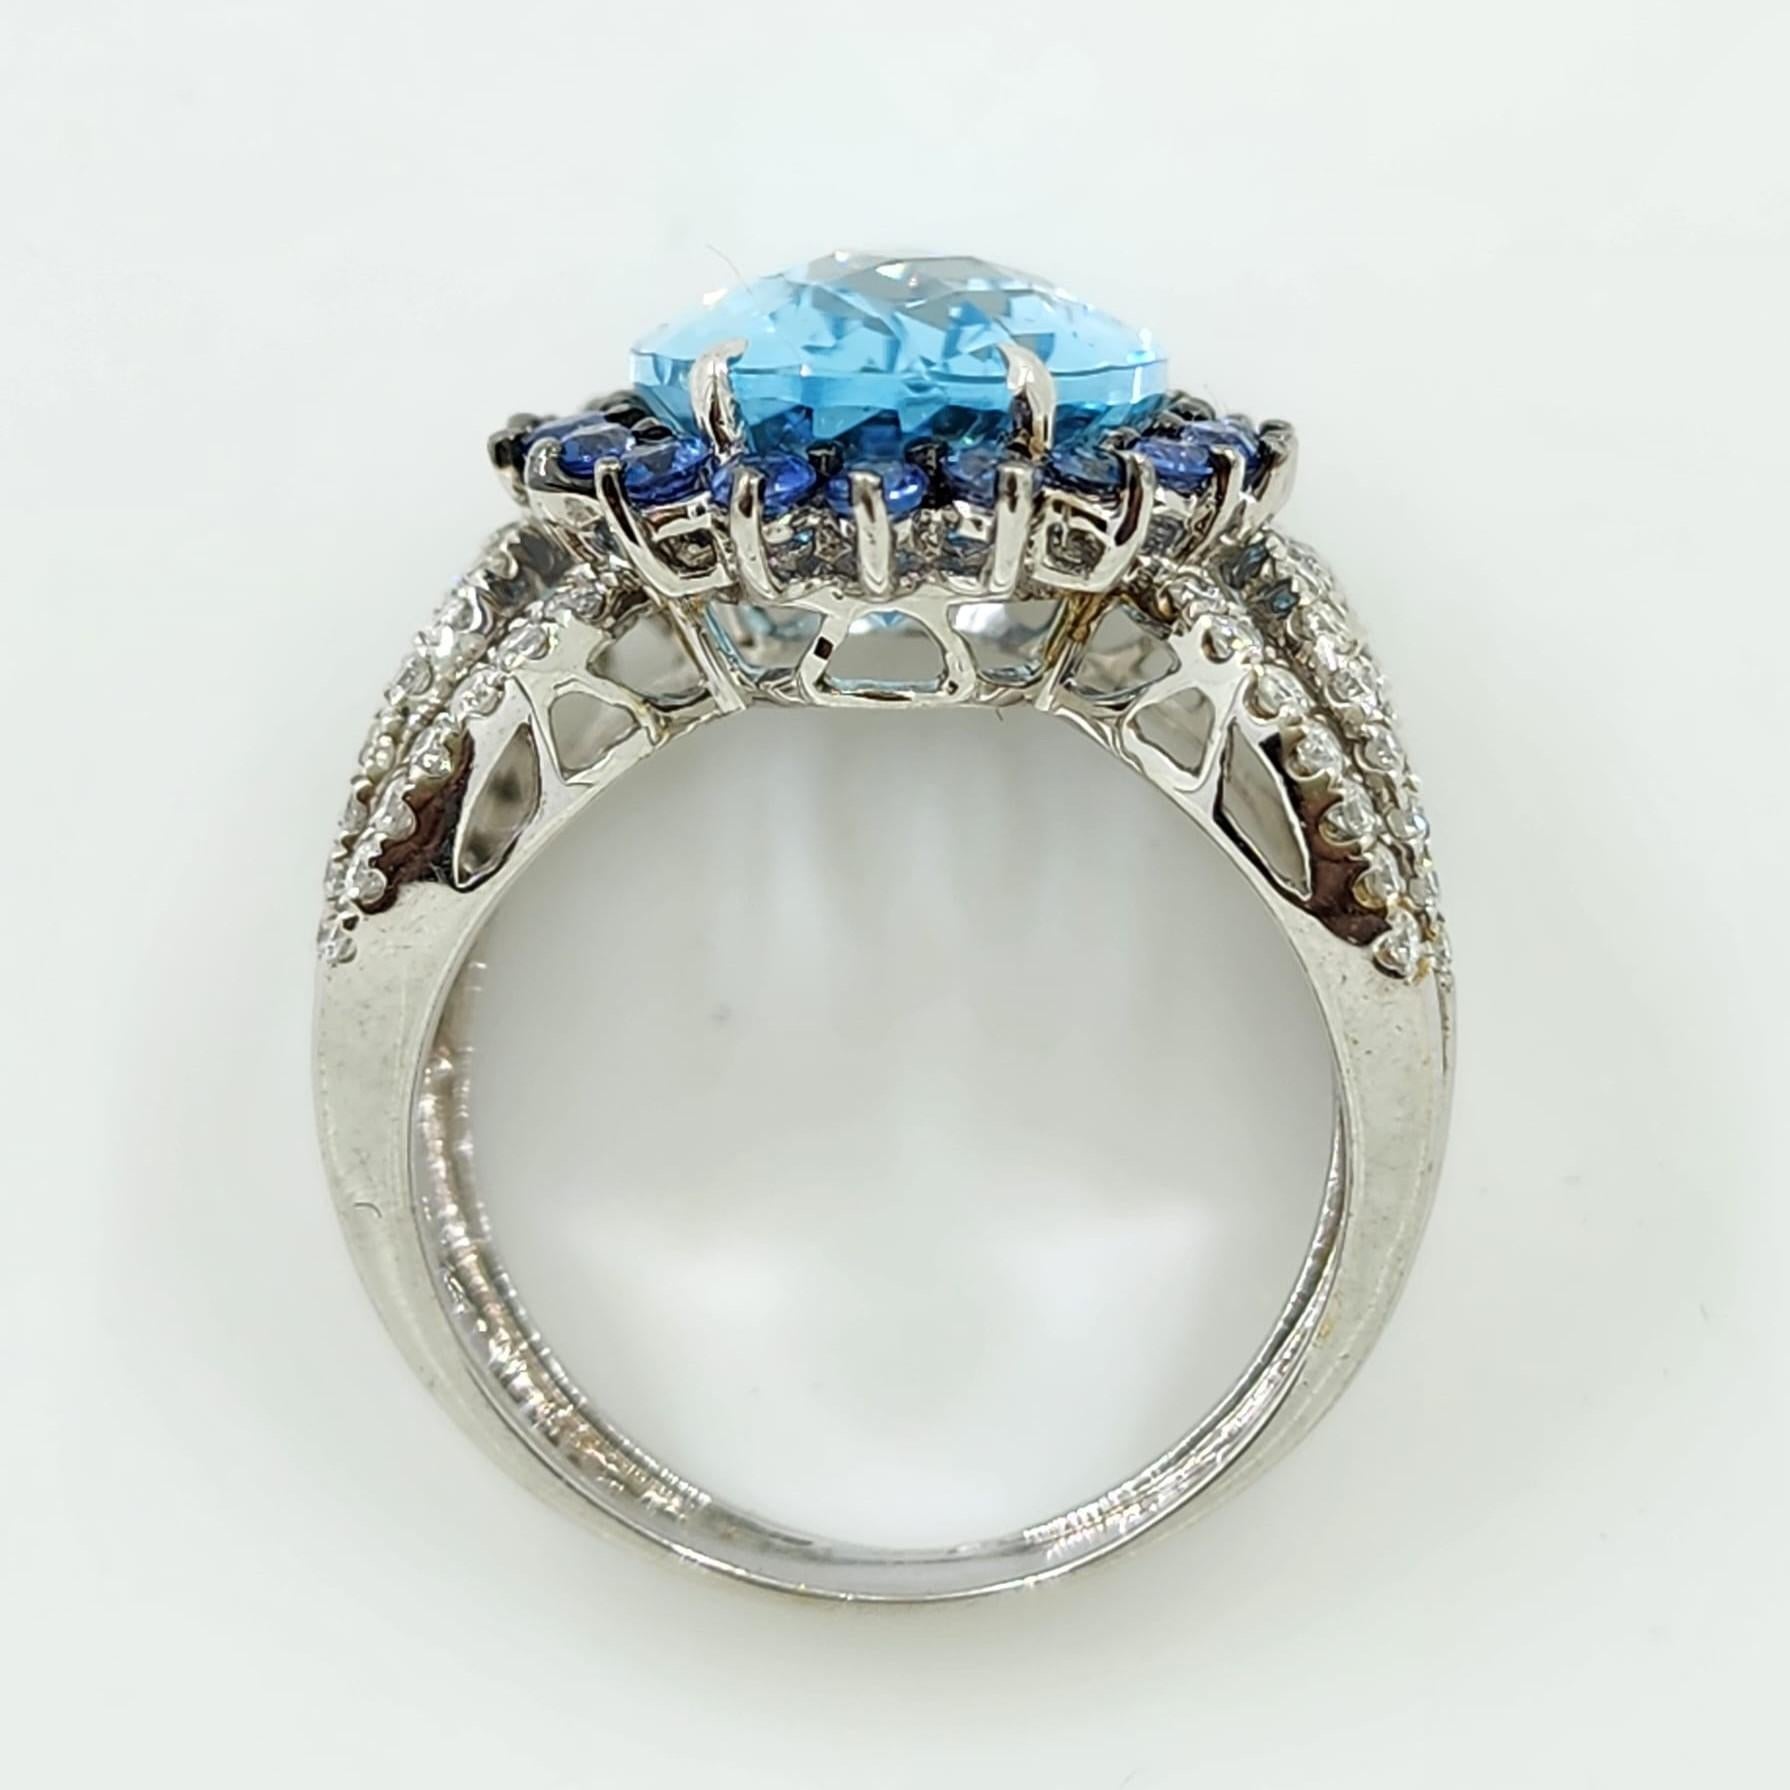 Oval Cut 6.96Ct Blue Topaz Blue Sapphire Diamond Cocktail Ring in 18 Karat White Gold For Sale